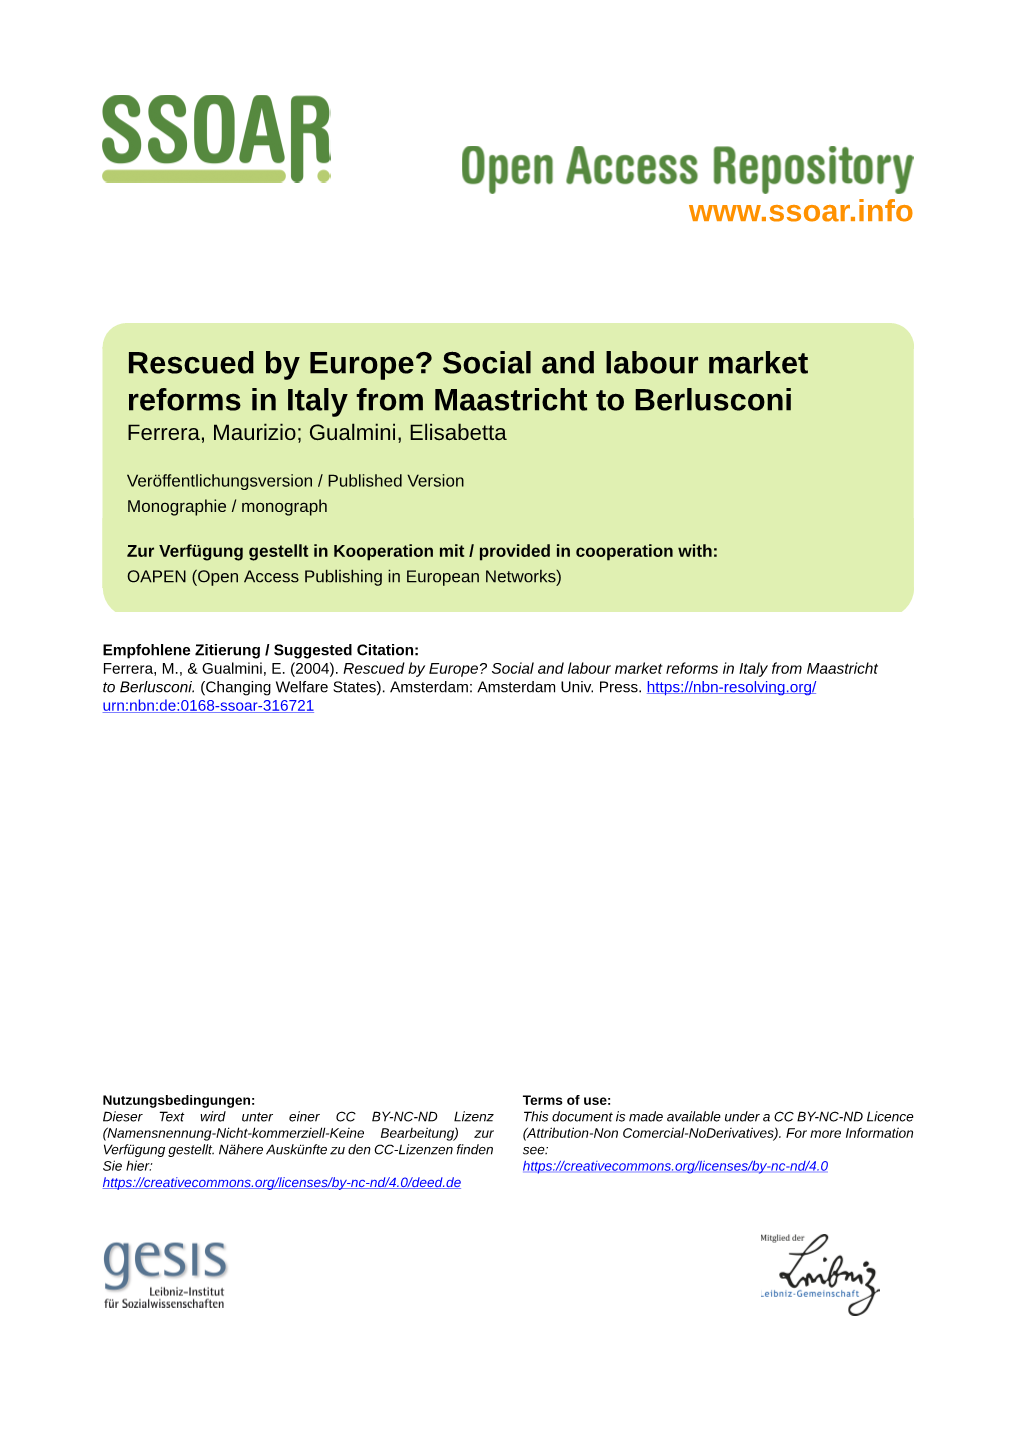 Rescued by Europe? Social and Labour Market Reforms in Italy from Maastricht to Berlusconi Ferrera, Maurizio; Gualmini, Elisabetta